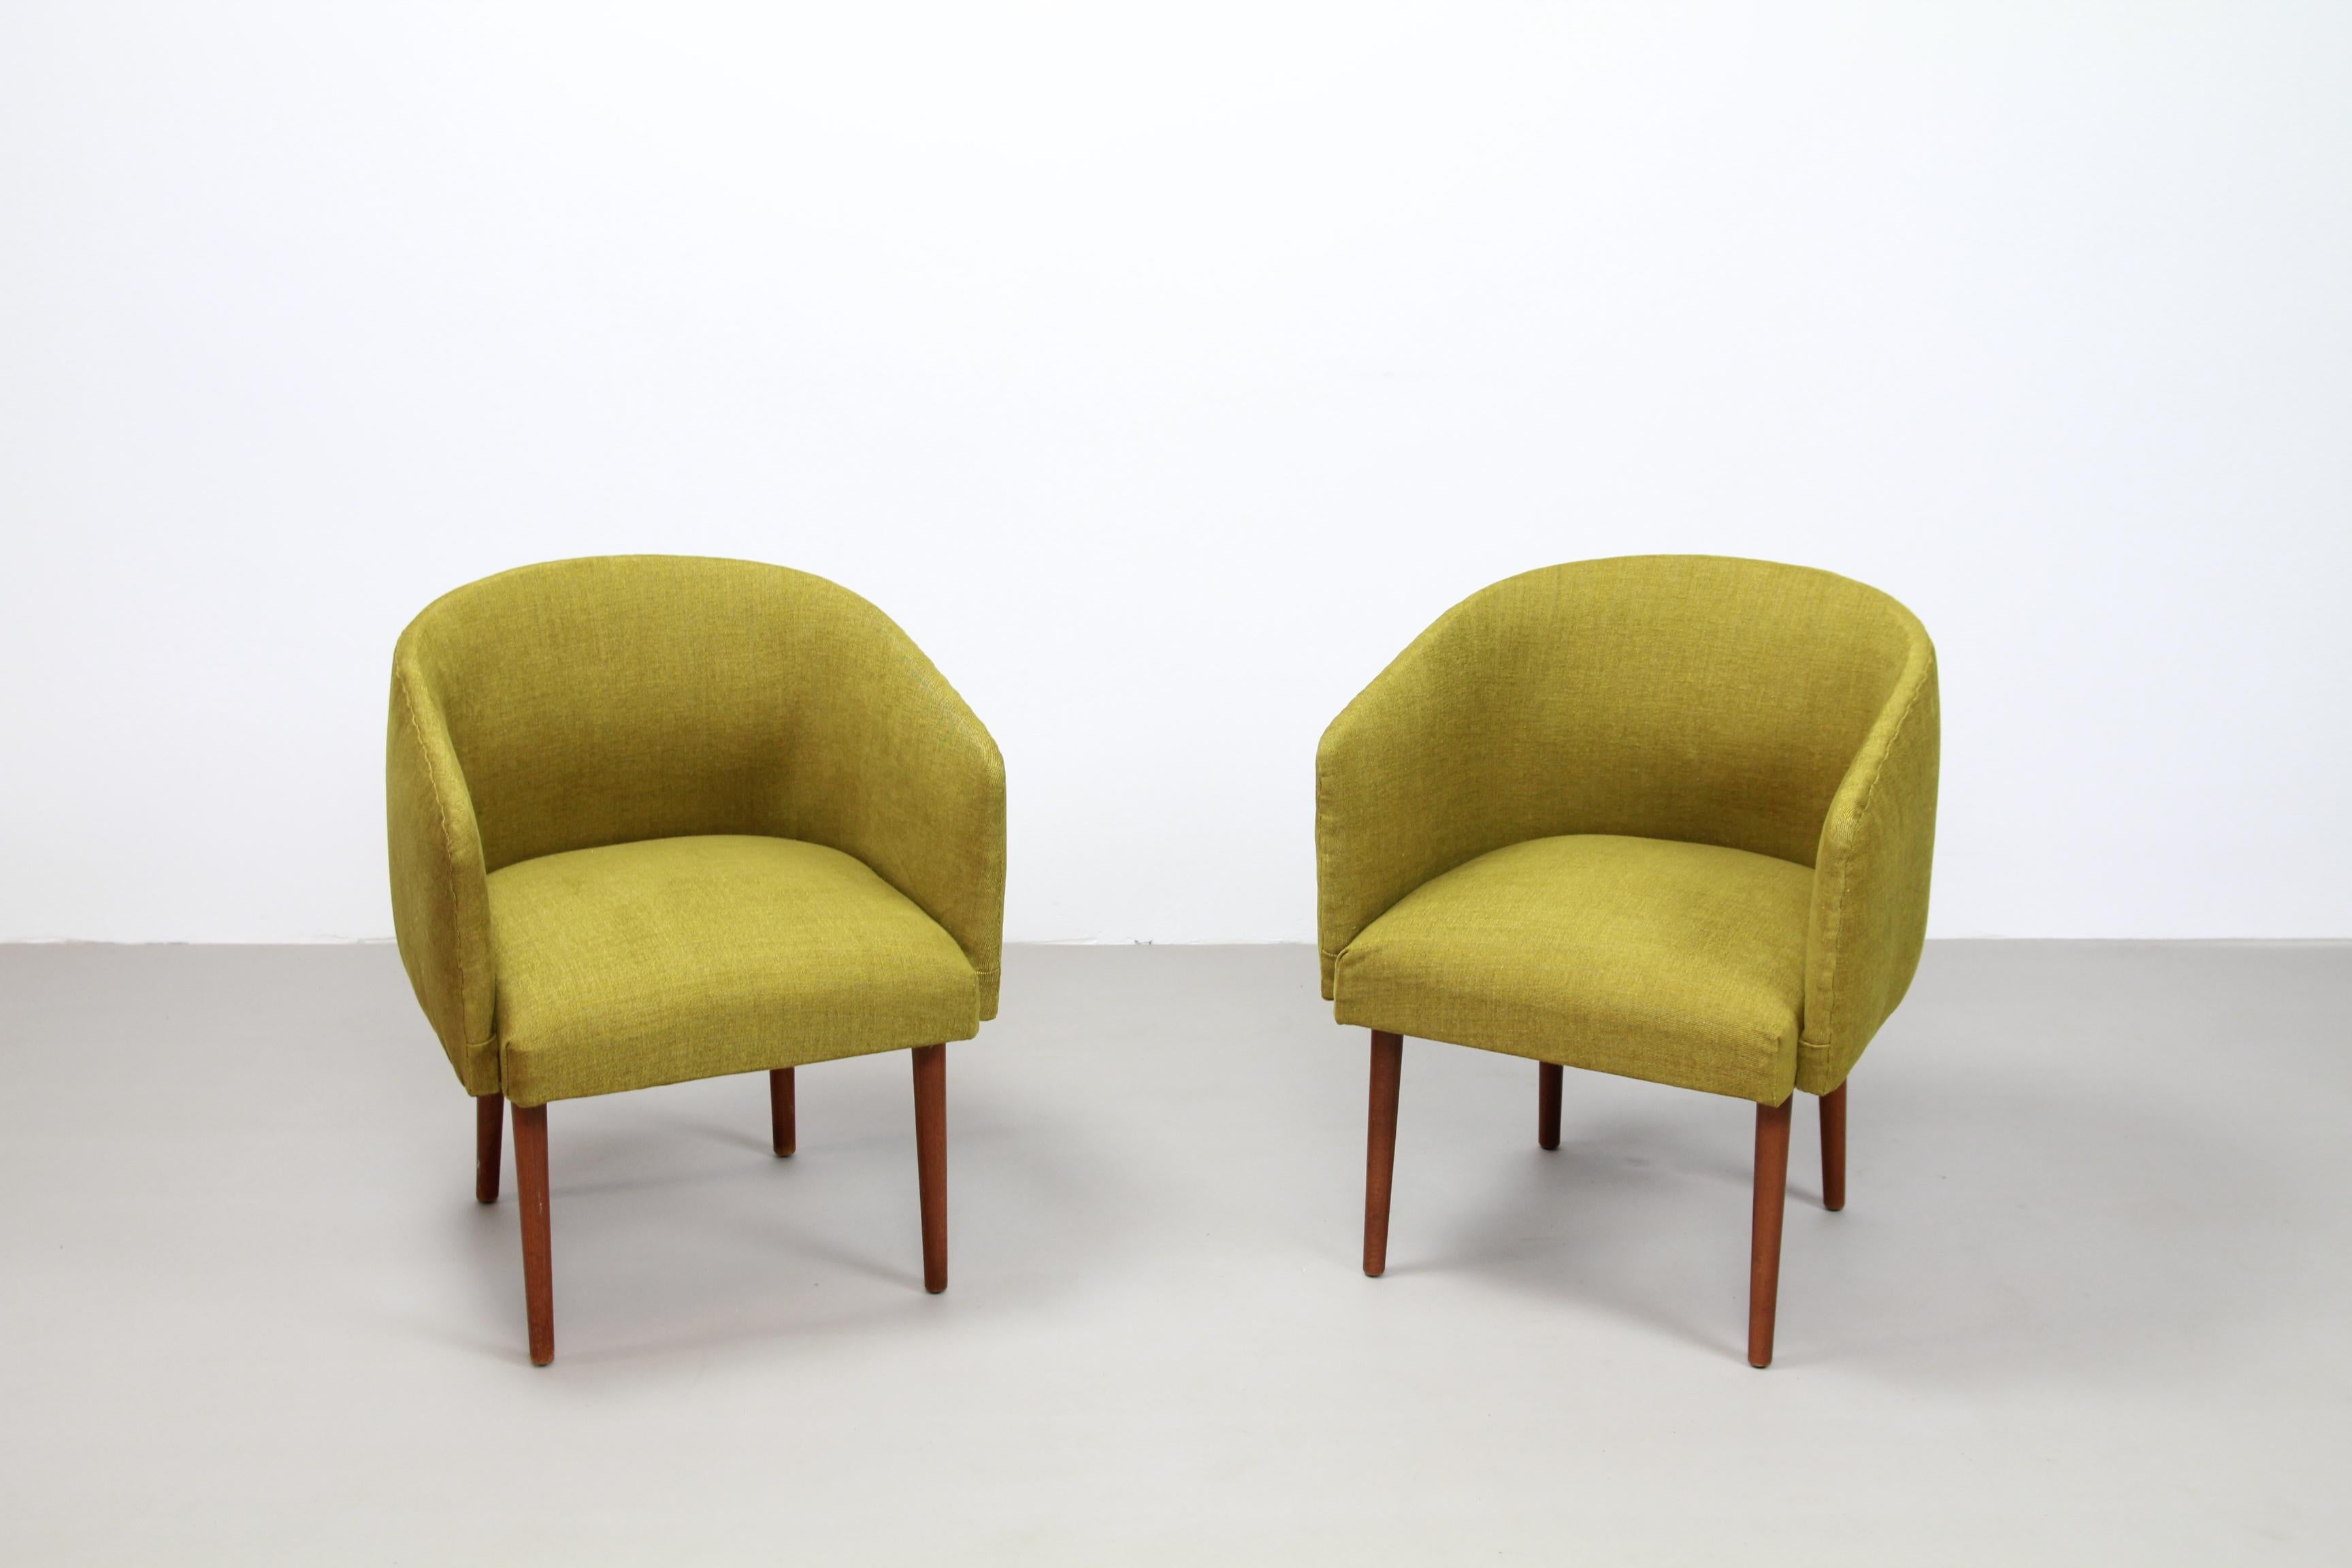 Nice set of two yellow Mid-Century Modern shell chairs. Unfortunately we do not know who the designer or manufacturer is, but we fell for the design. These nice club chairs don't take up much space optically and are therefore very suitable for small